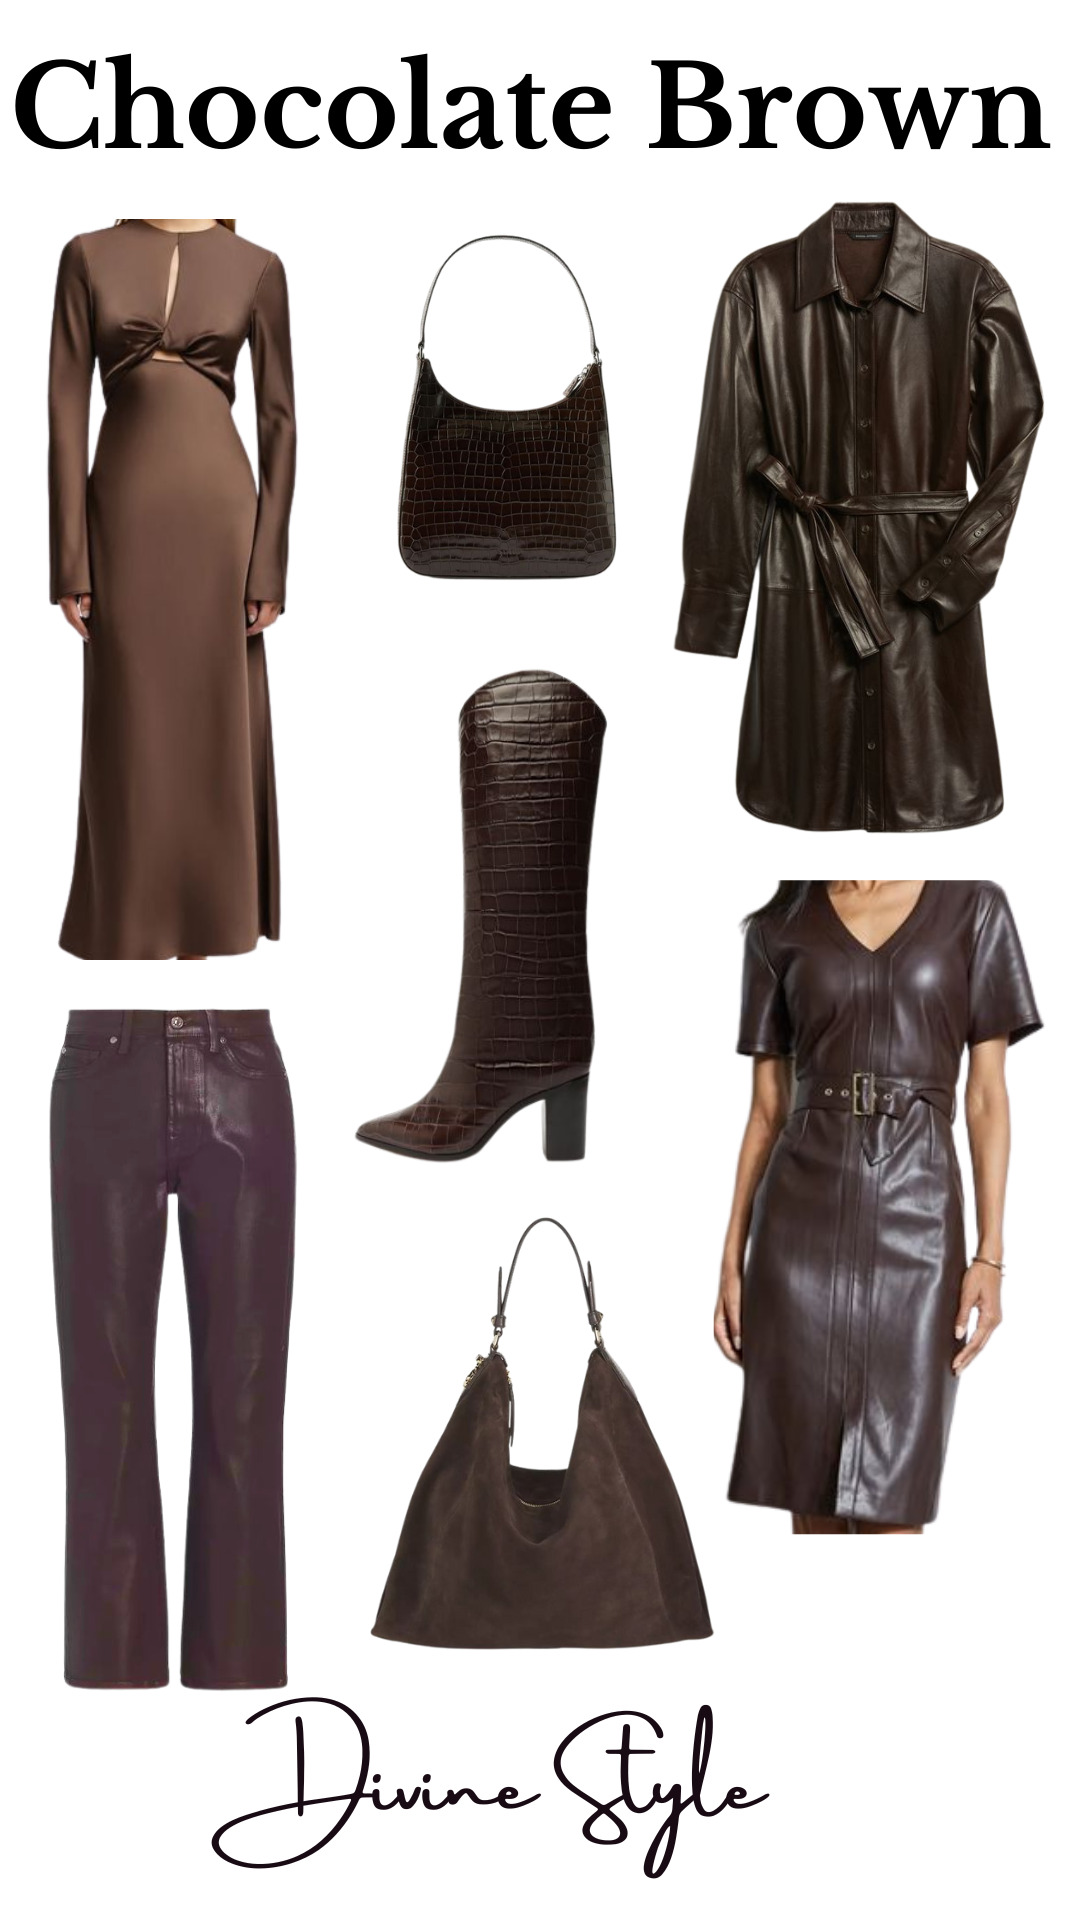 Fall Colors of the Season- Chocolate & Red, shop chocolate clothing, shoes, accessories